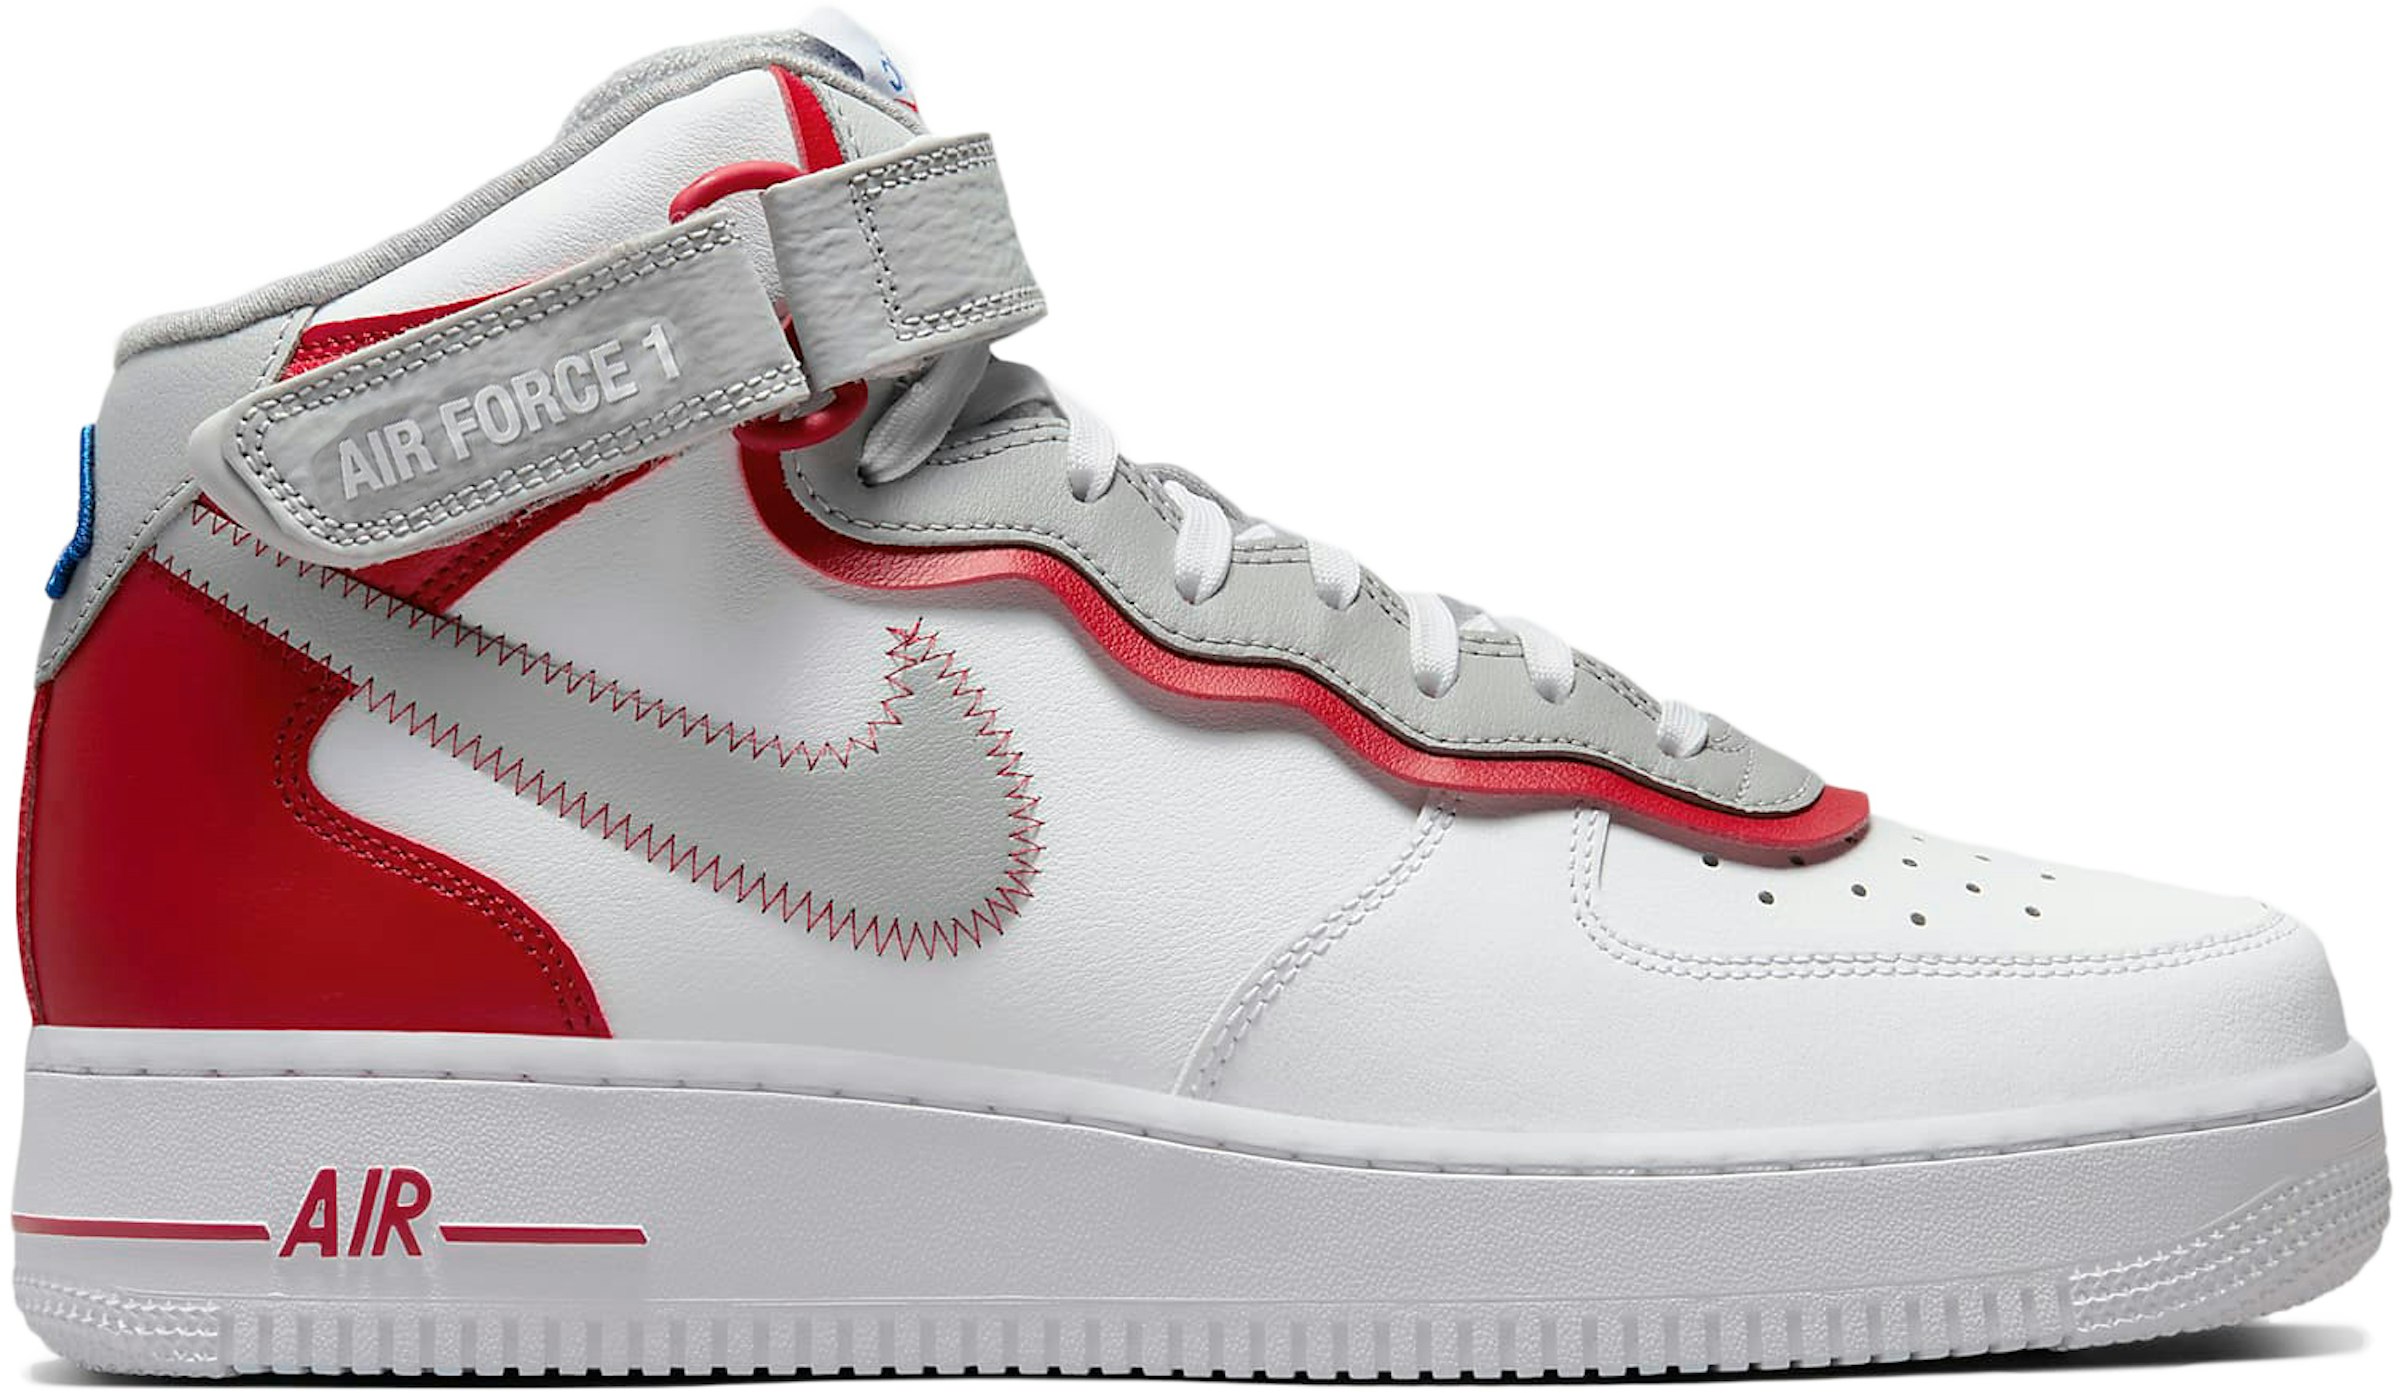 Nike Air Force 1 Mid Athletic White Gym Red - DH7451-100 US